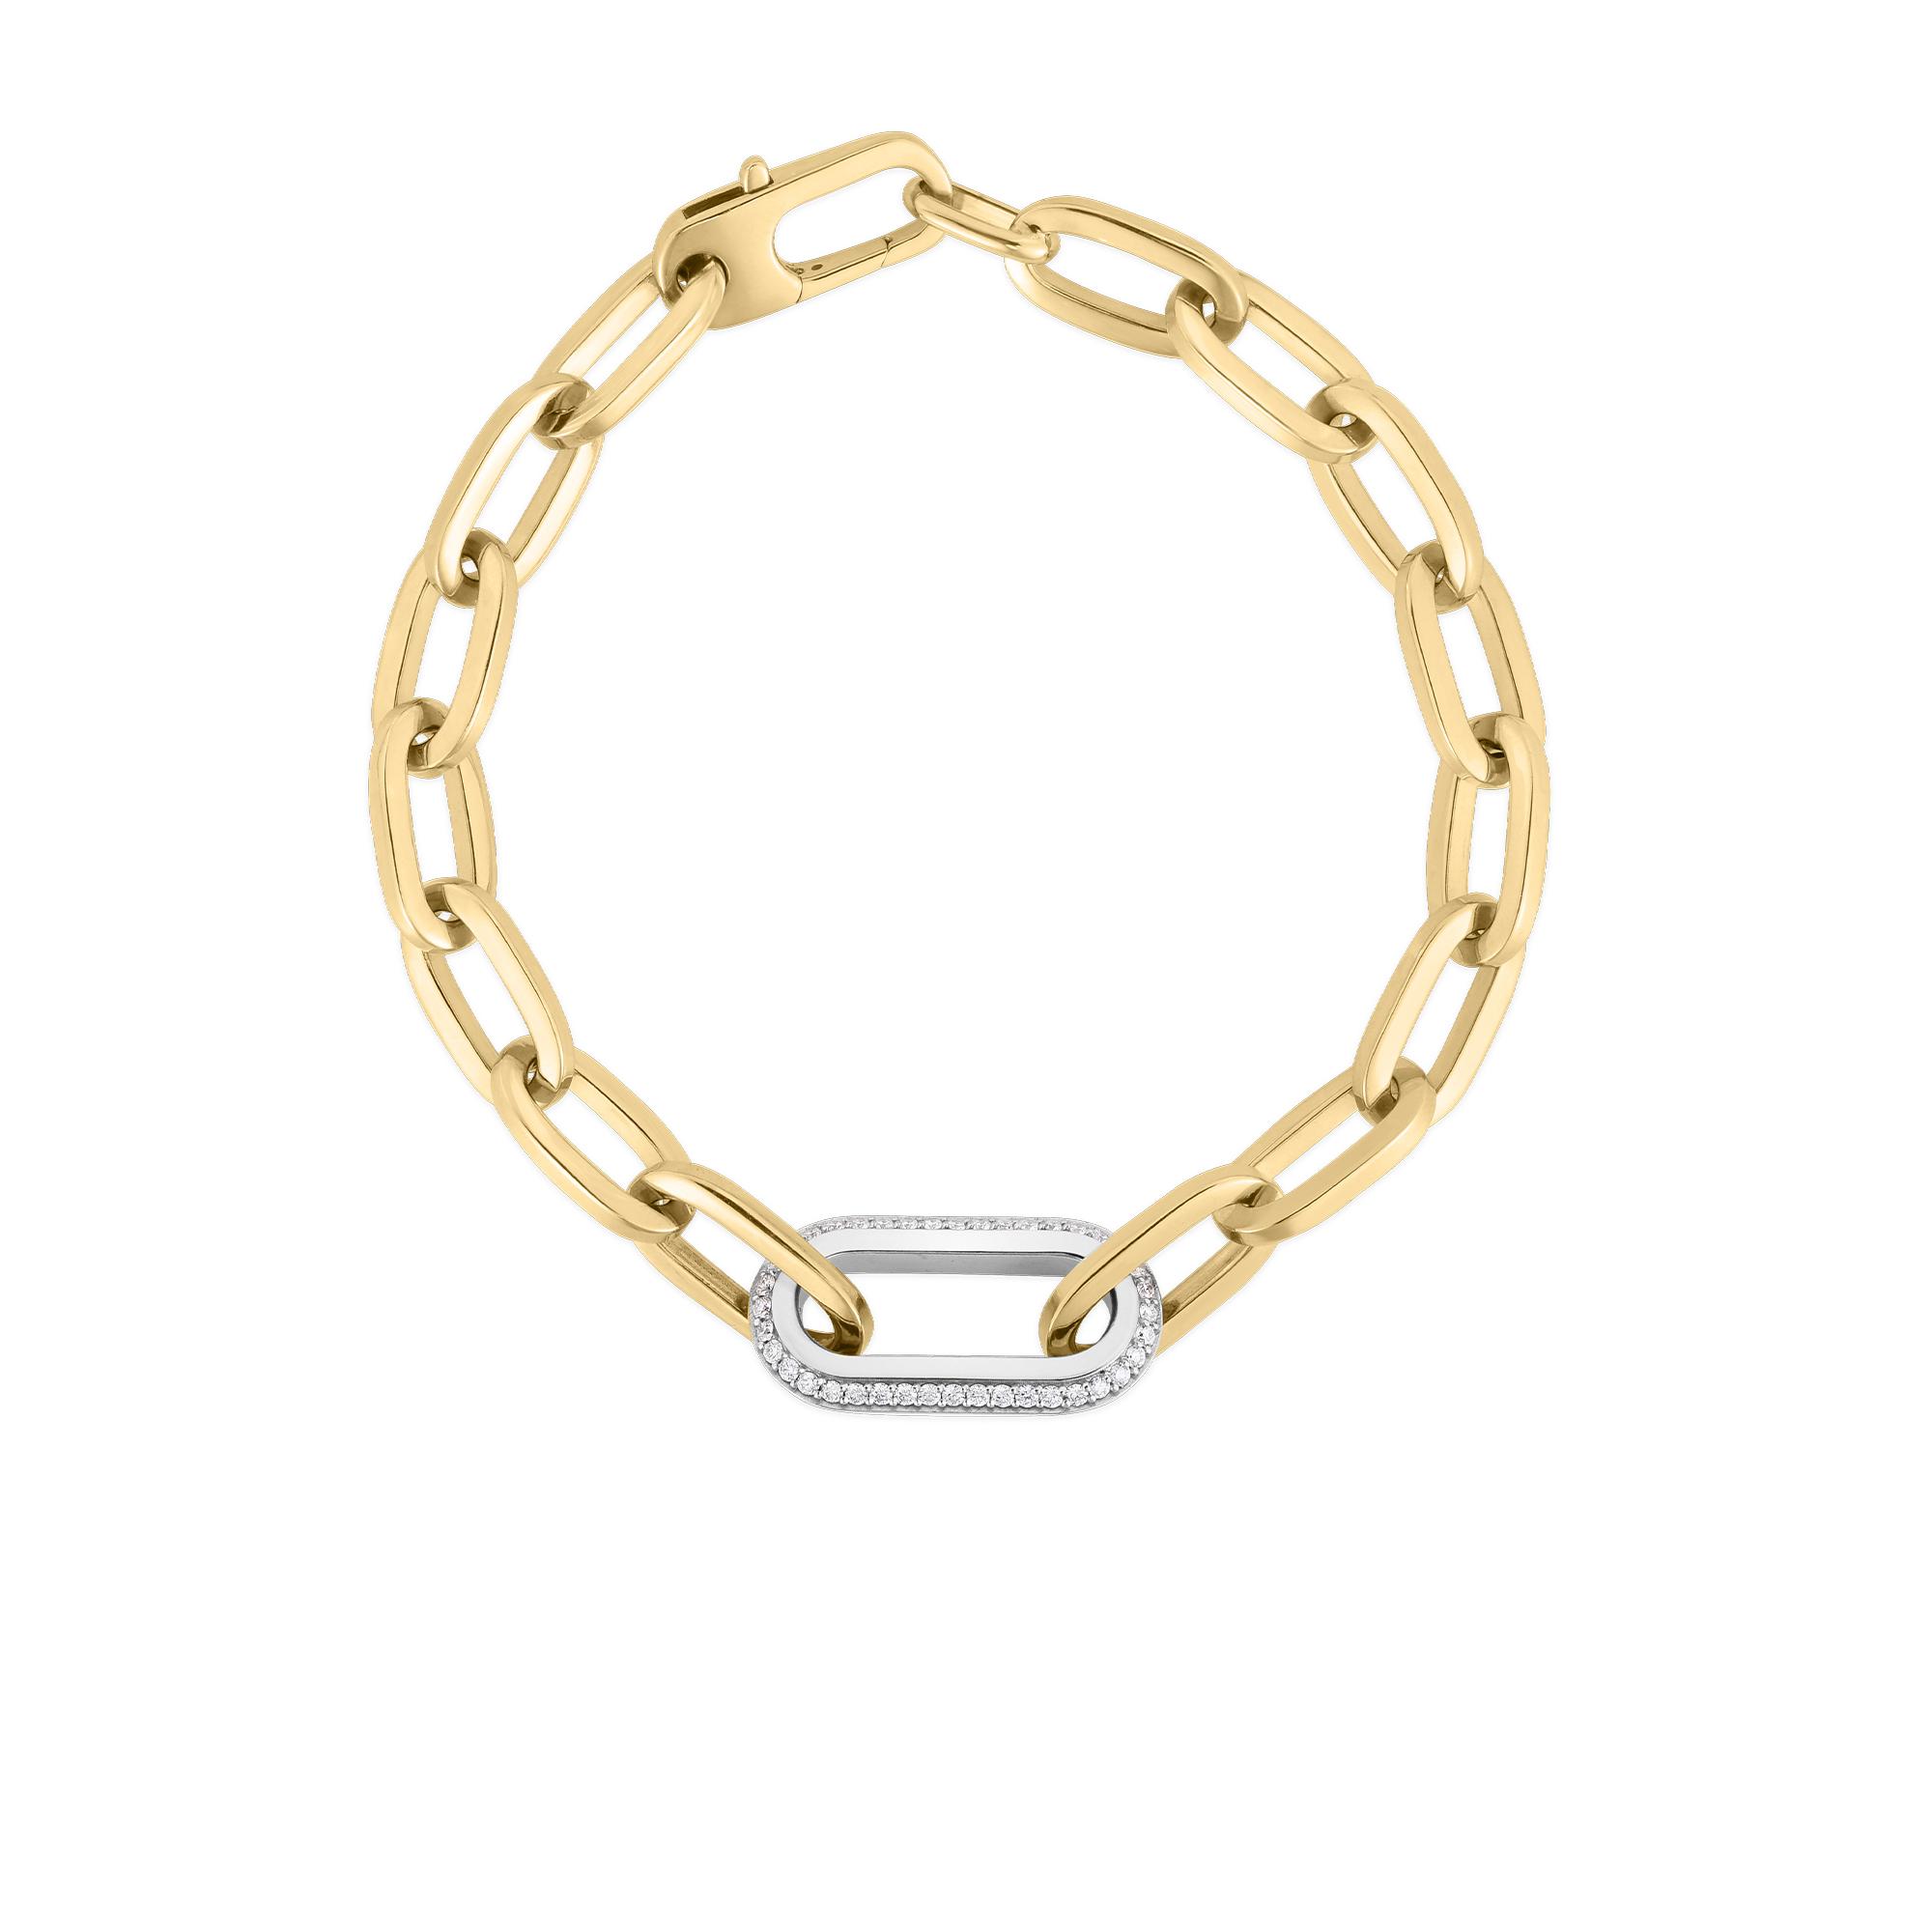 Roberto Coin Designer Gold Paperclip Bracelet with Large Diamond Link 0